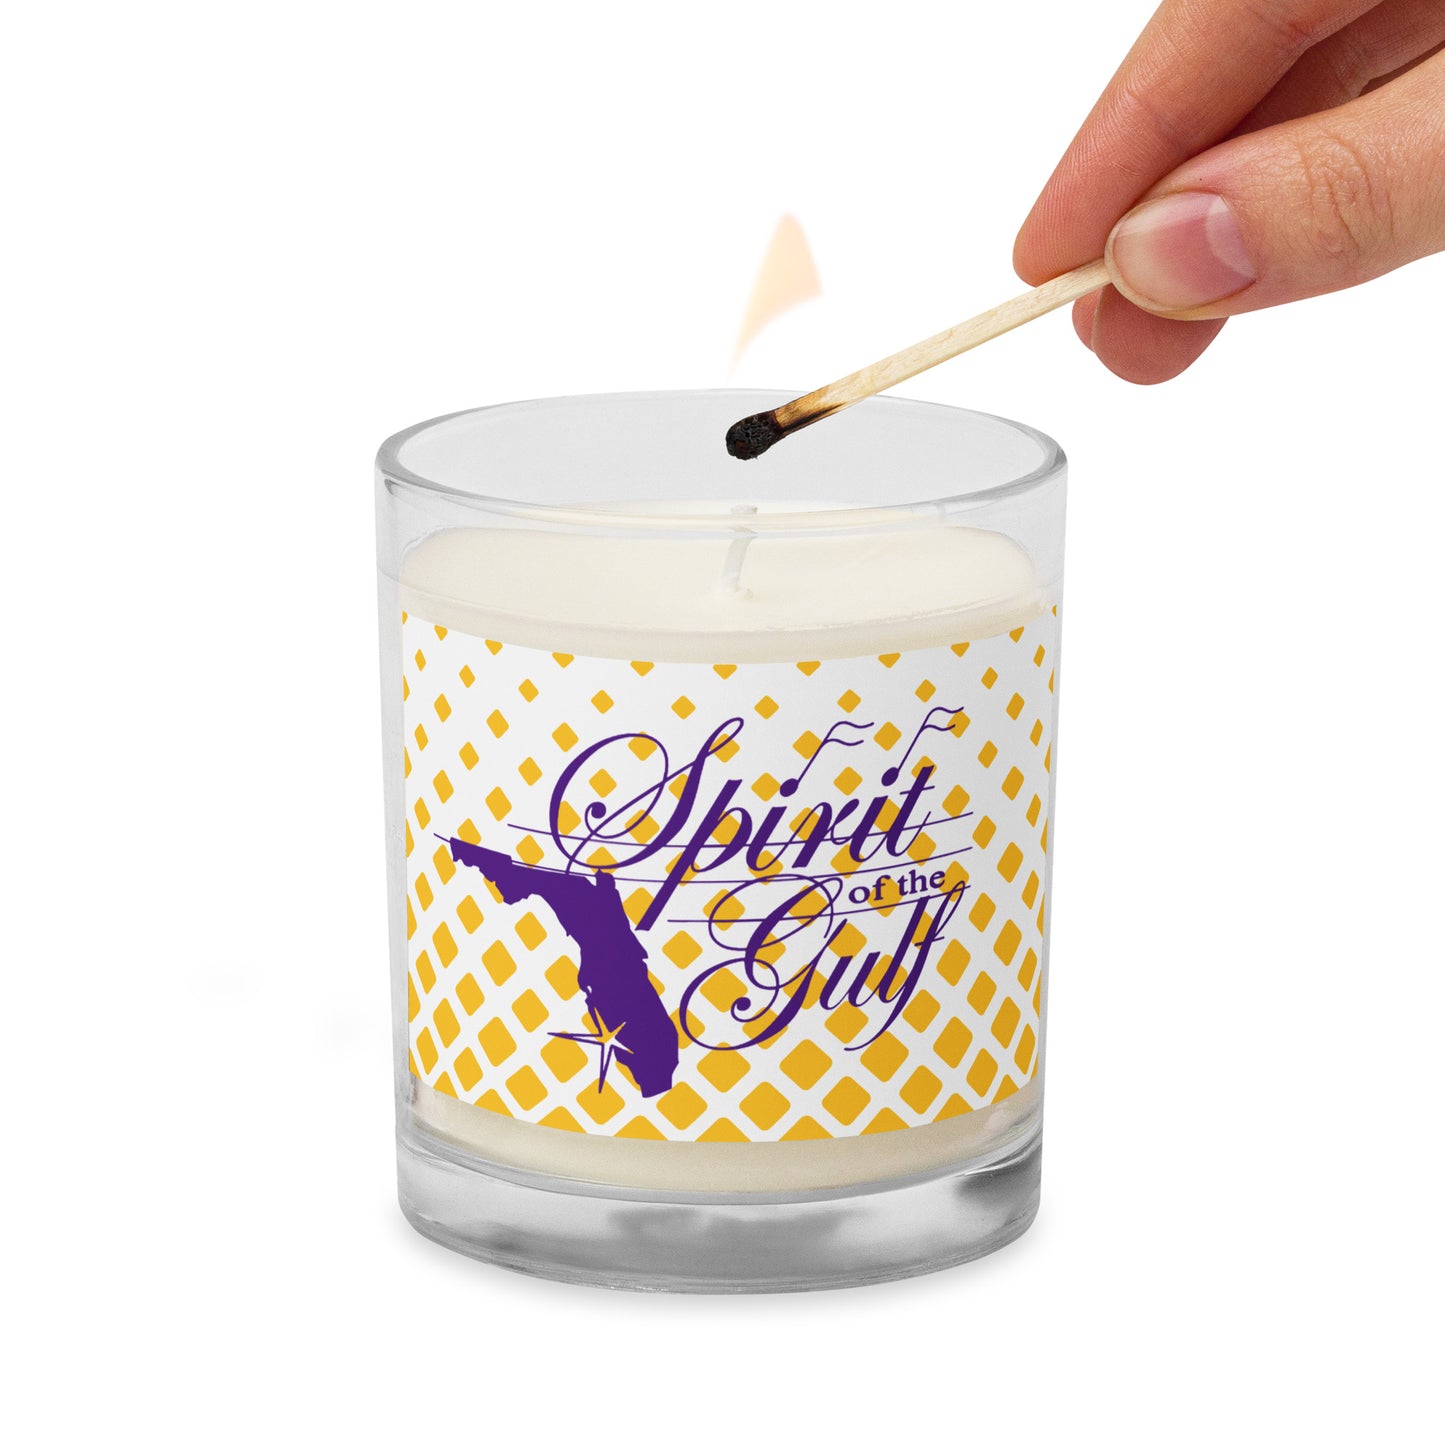 Spirit of the Gulf - Glass jar soy wax candle